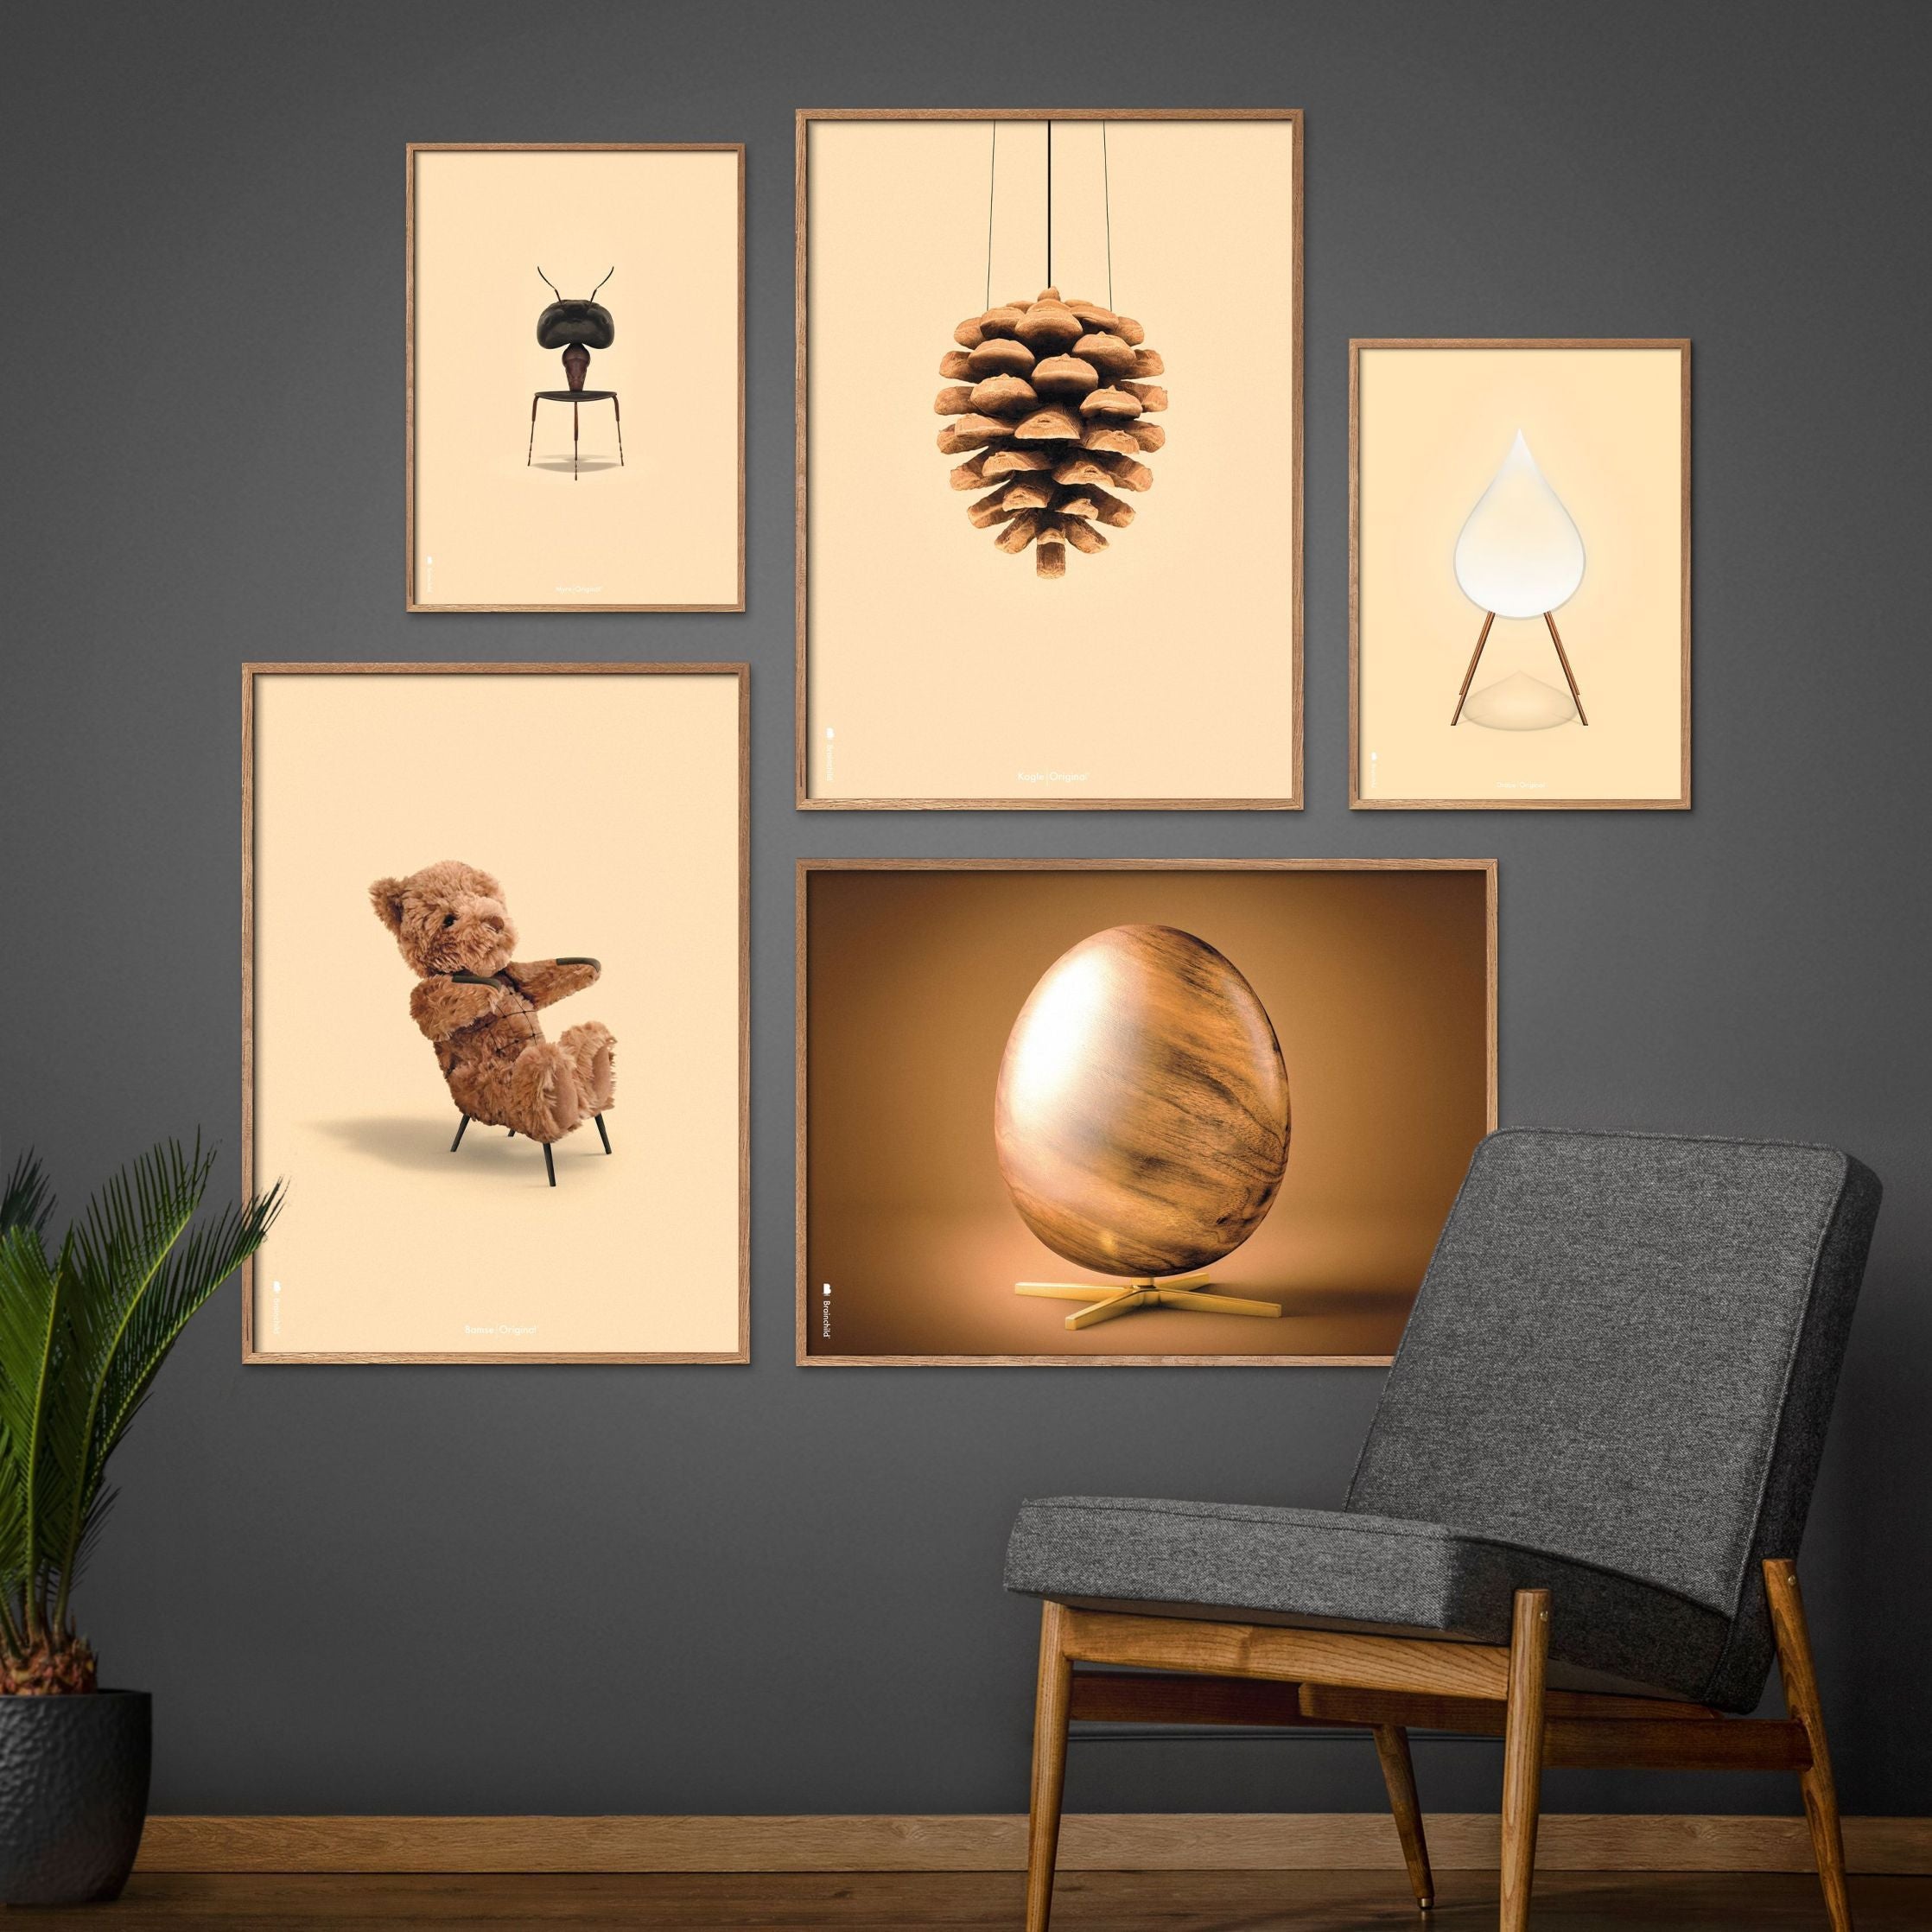 Brainchild Drop Classic Poster, Frame Made Of Dark Wood 50x70 Cm, Sand Colored Background